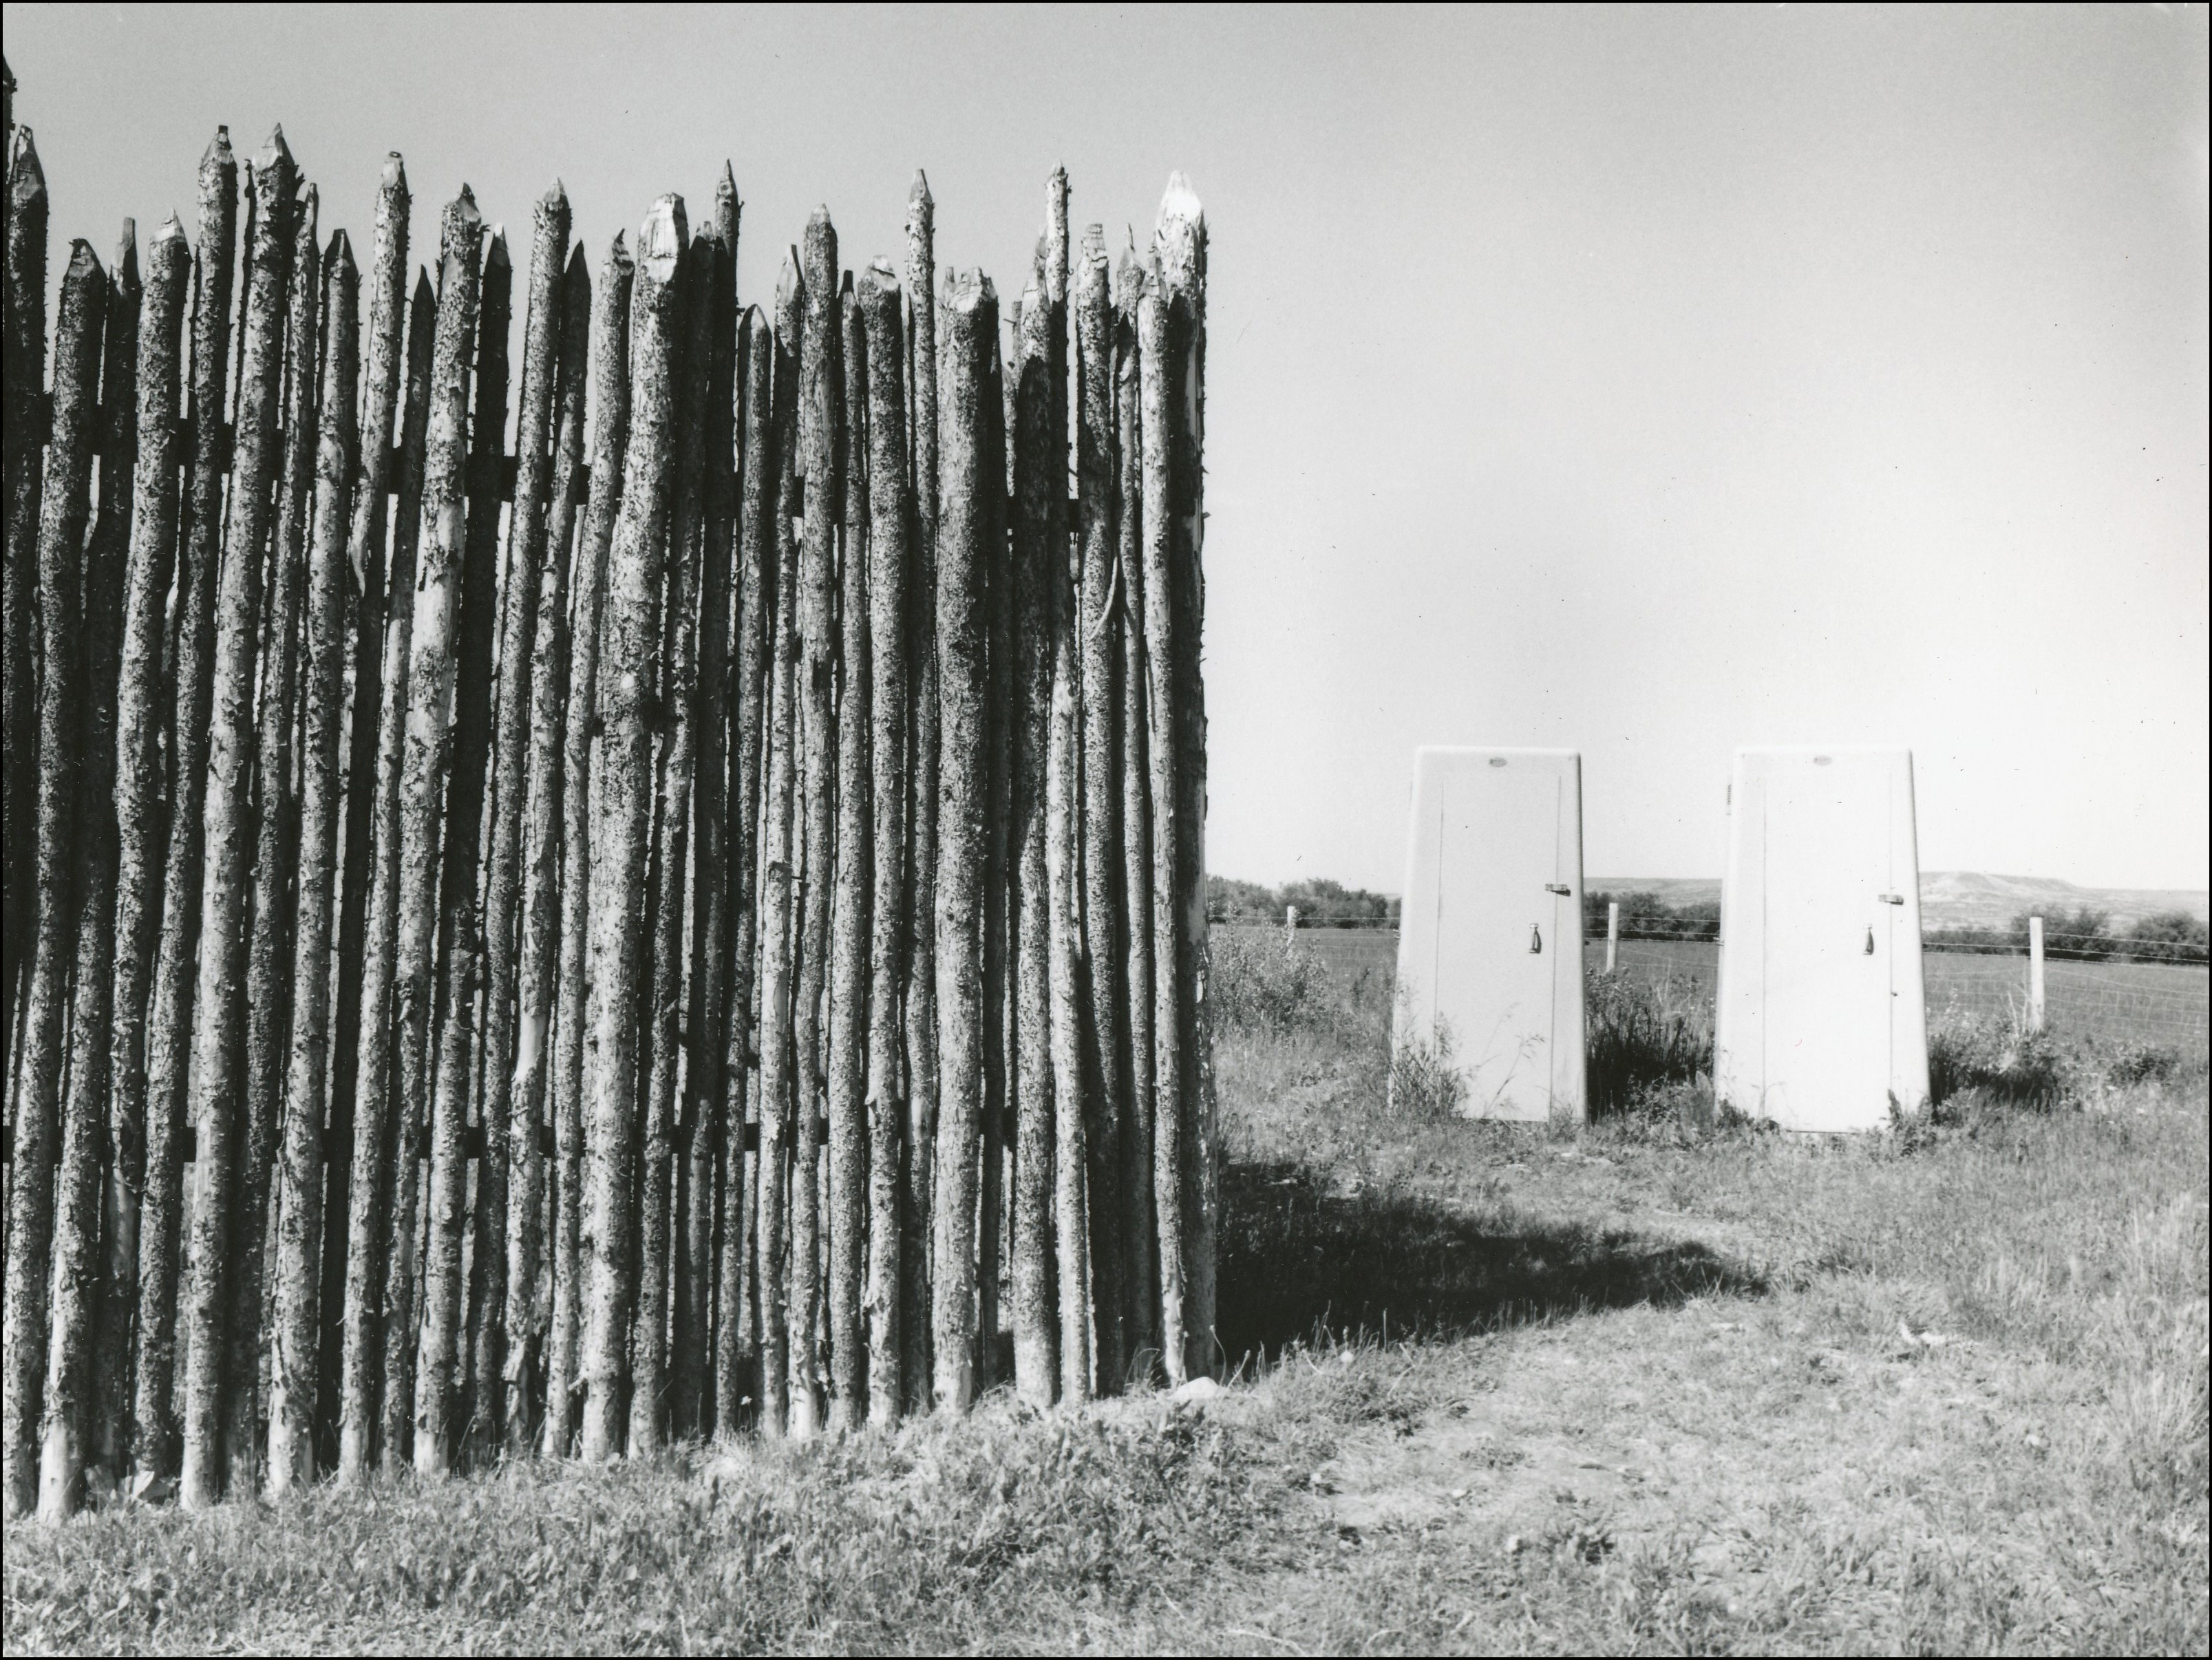 2 portapotties behind an old fort fence made of lodgepoles with pointed tops